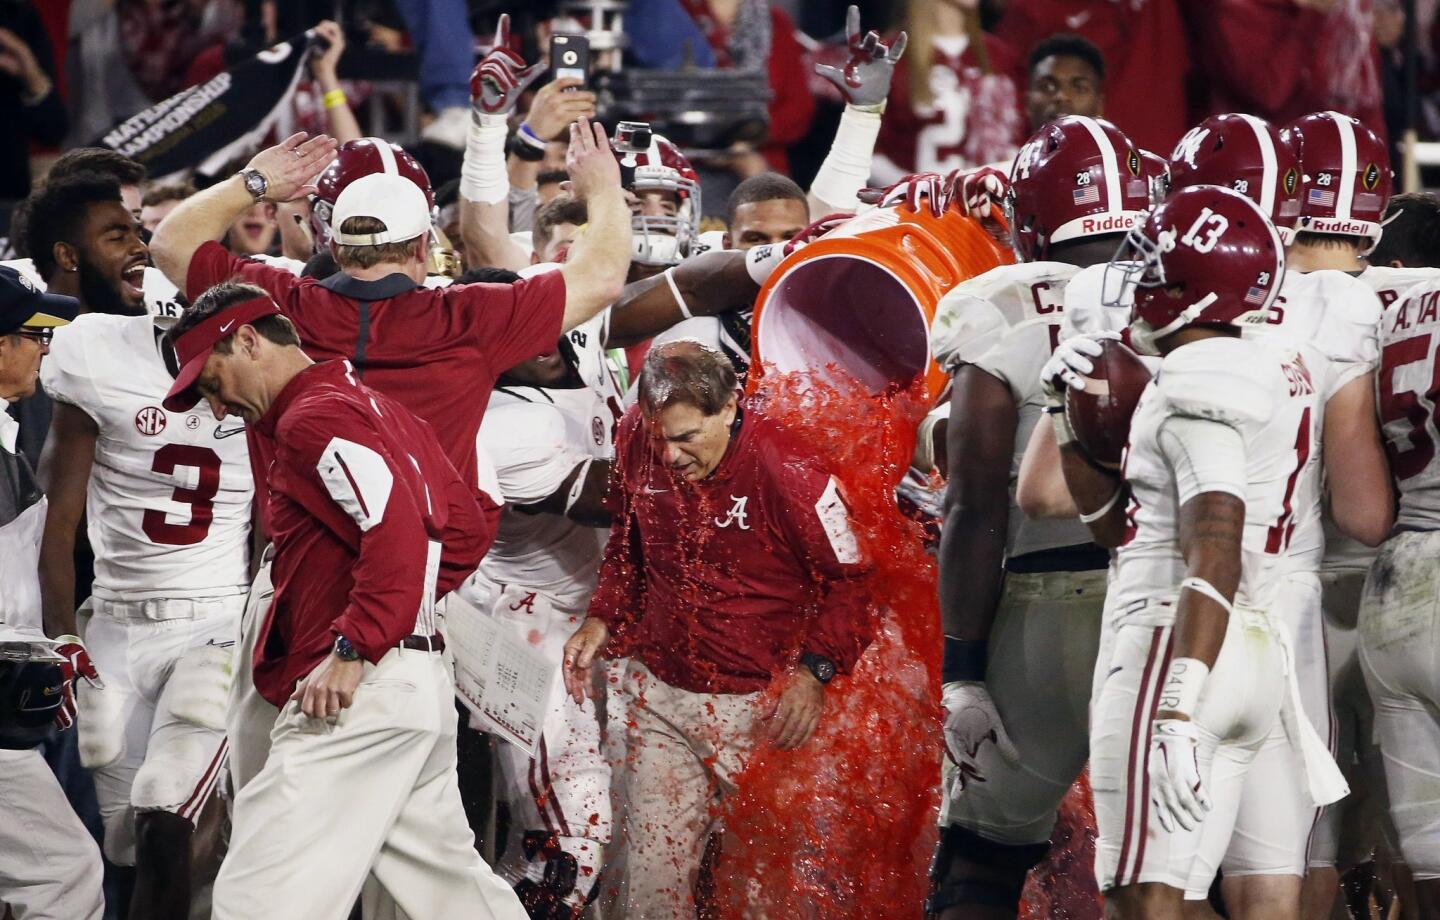 Alabama head coach Nick Saban gets doused after the NCAA college football playoff championship game against Clemson, Monday, Jan. 11, 2016, in Glendale, Ariz. Alabama won 45-40. (Rob Schumacher/The Arizona Republic via AP) MARICOPA COUNTY OUT; MAGS OUT; NO SALES; MANDATORY CREDIT